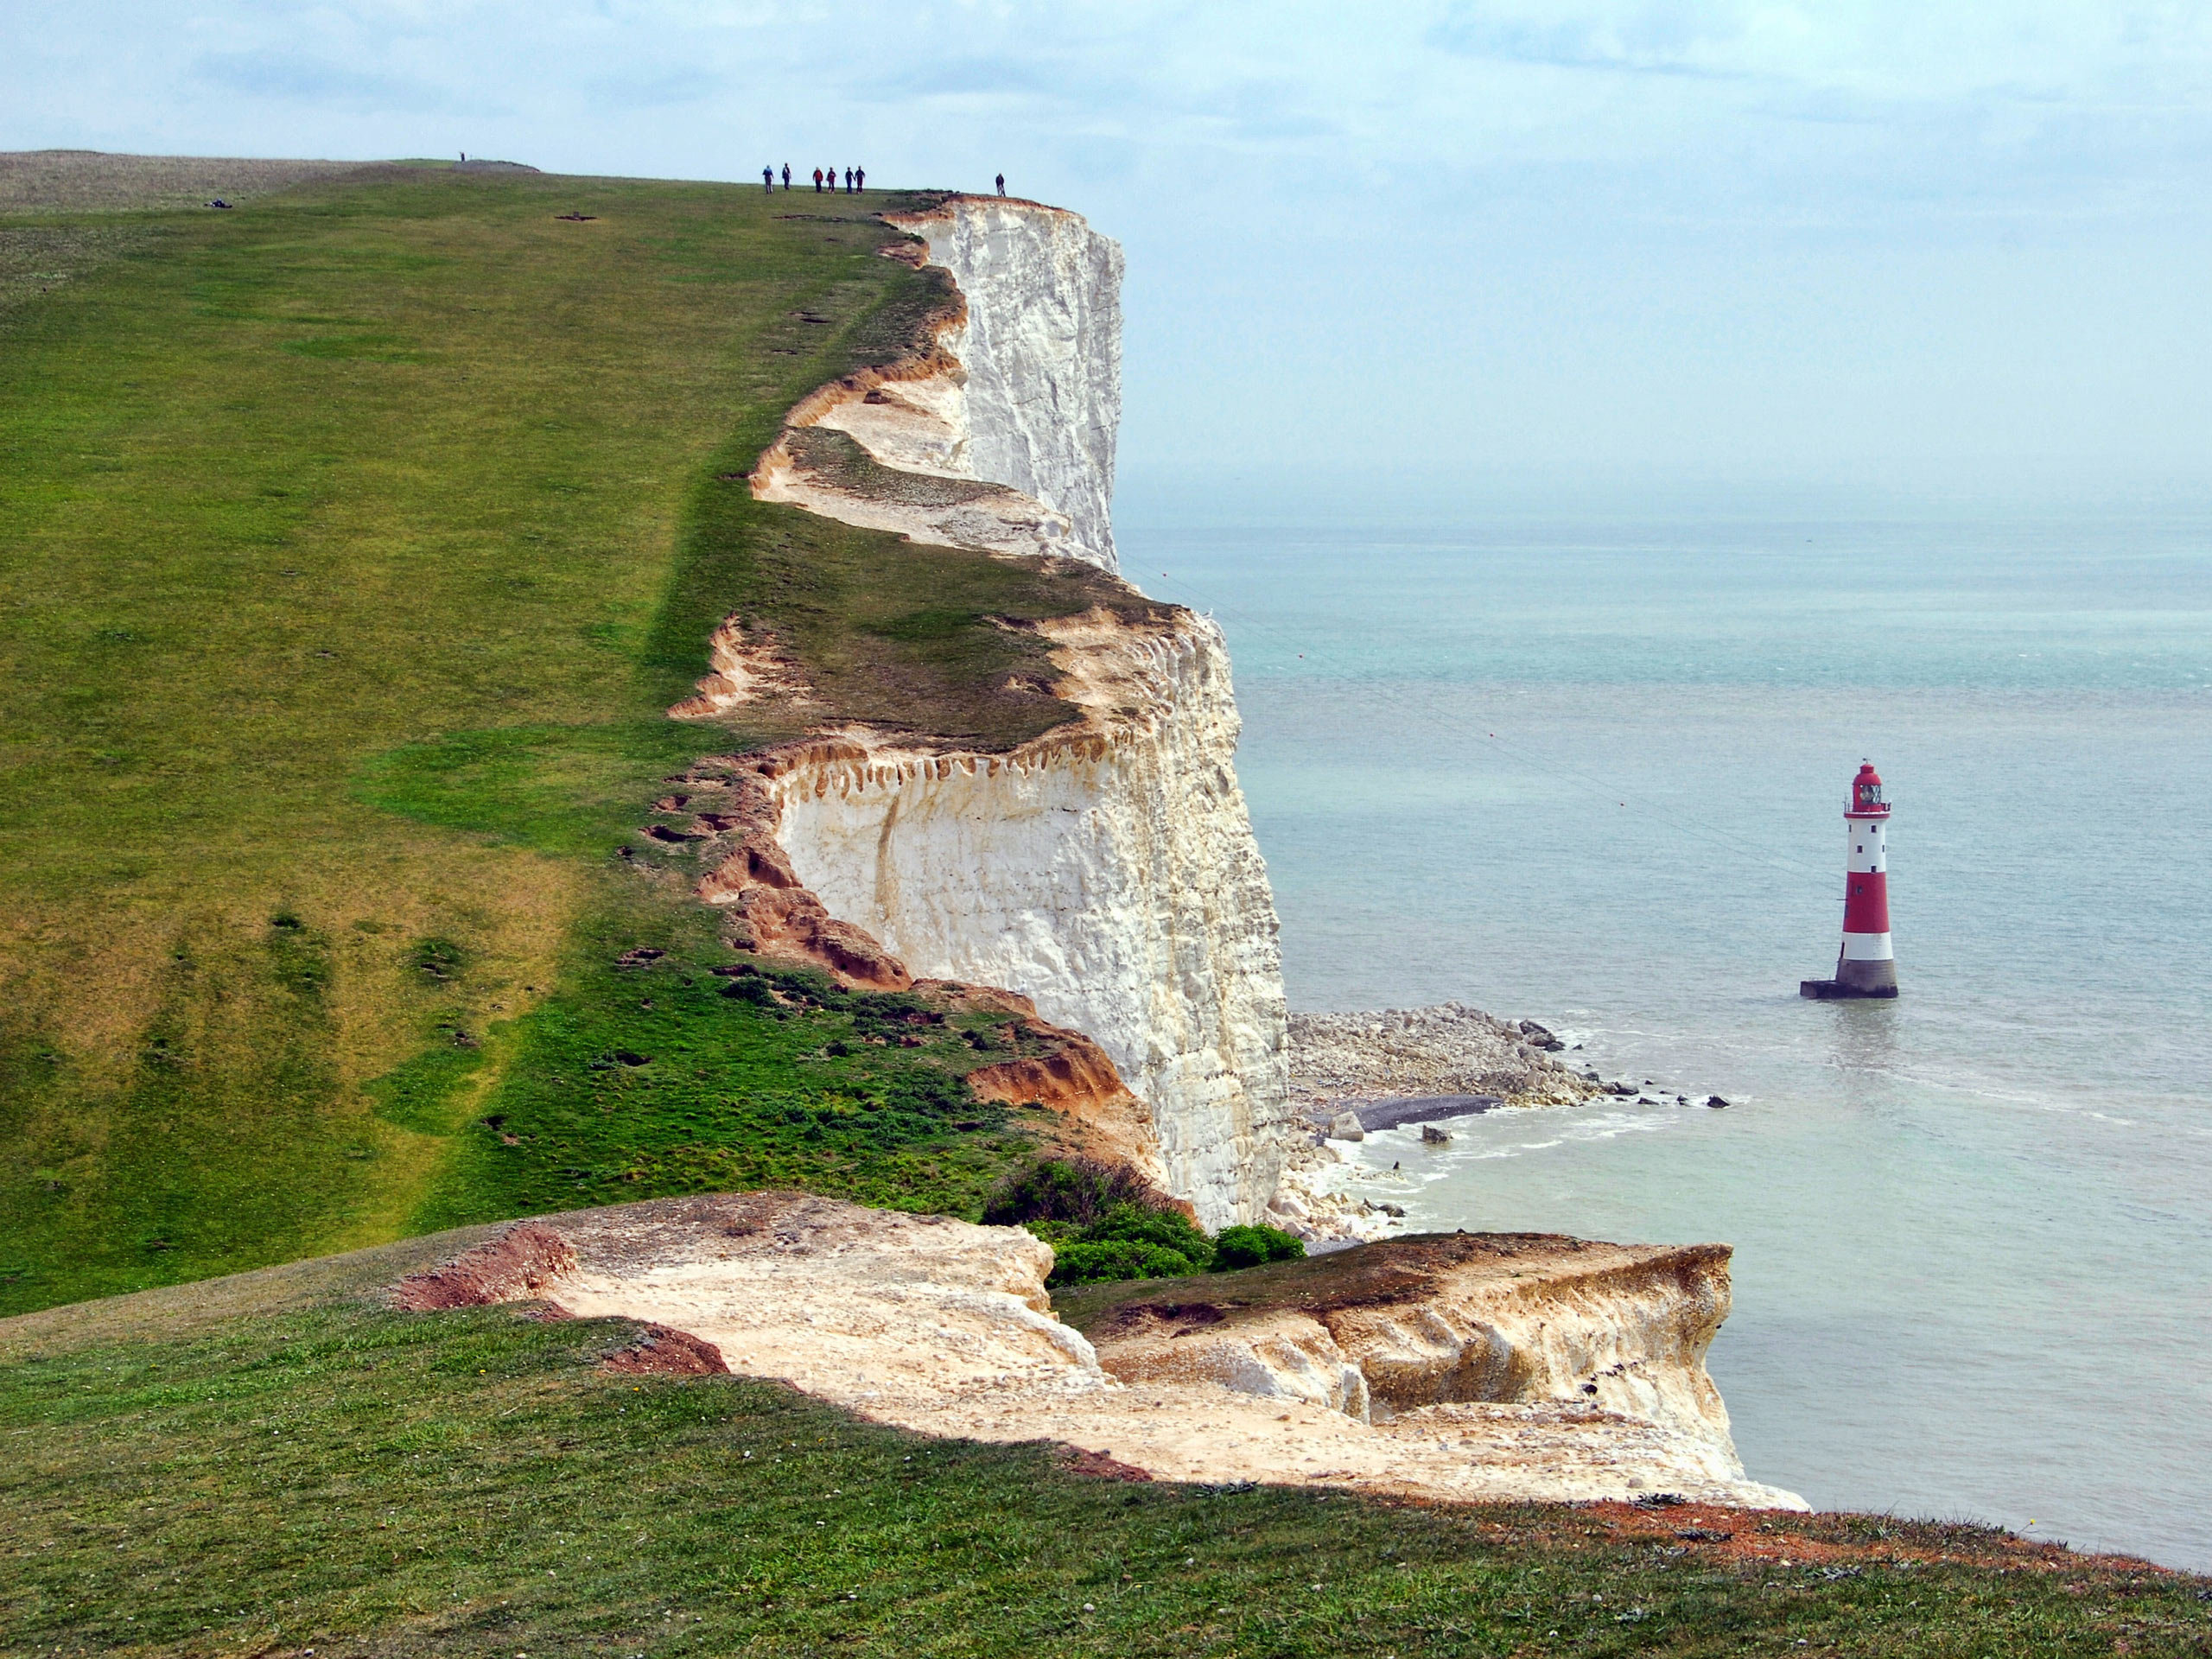 Lighthouse in the ocean by cliffs Eastborne Downland South Downs